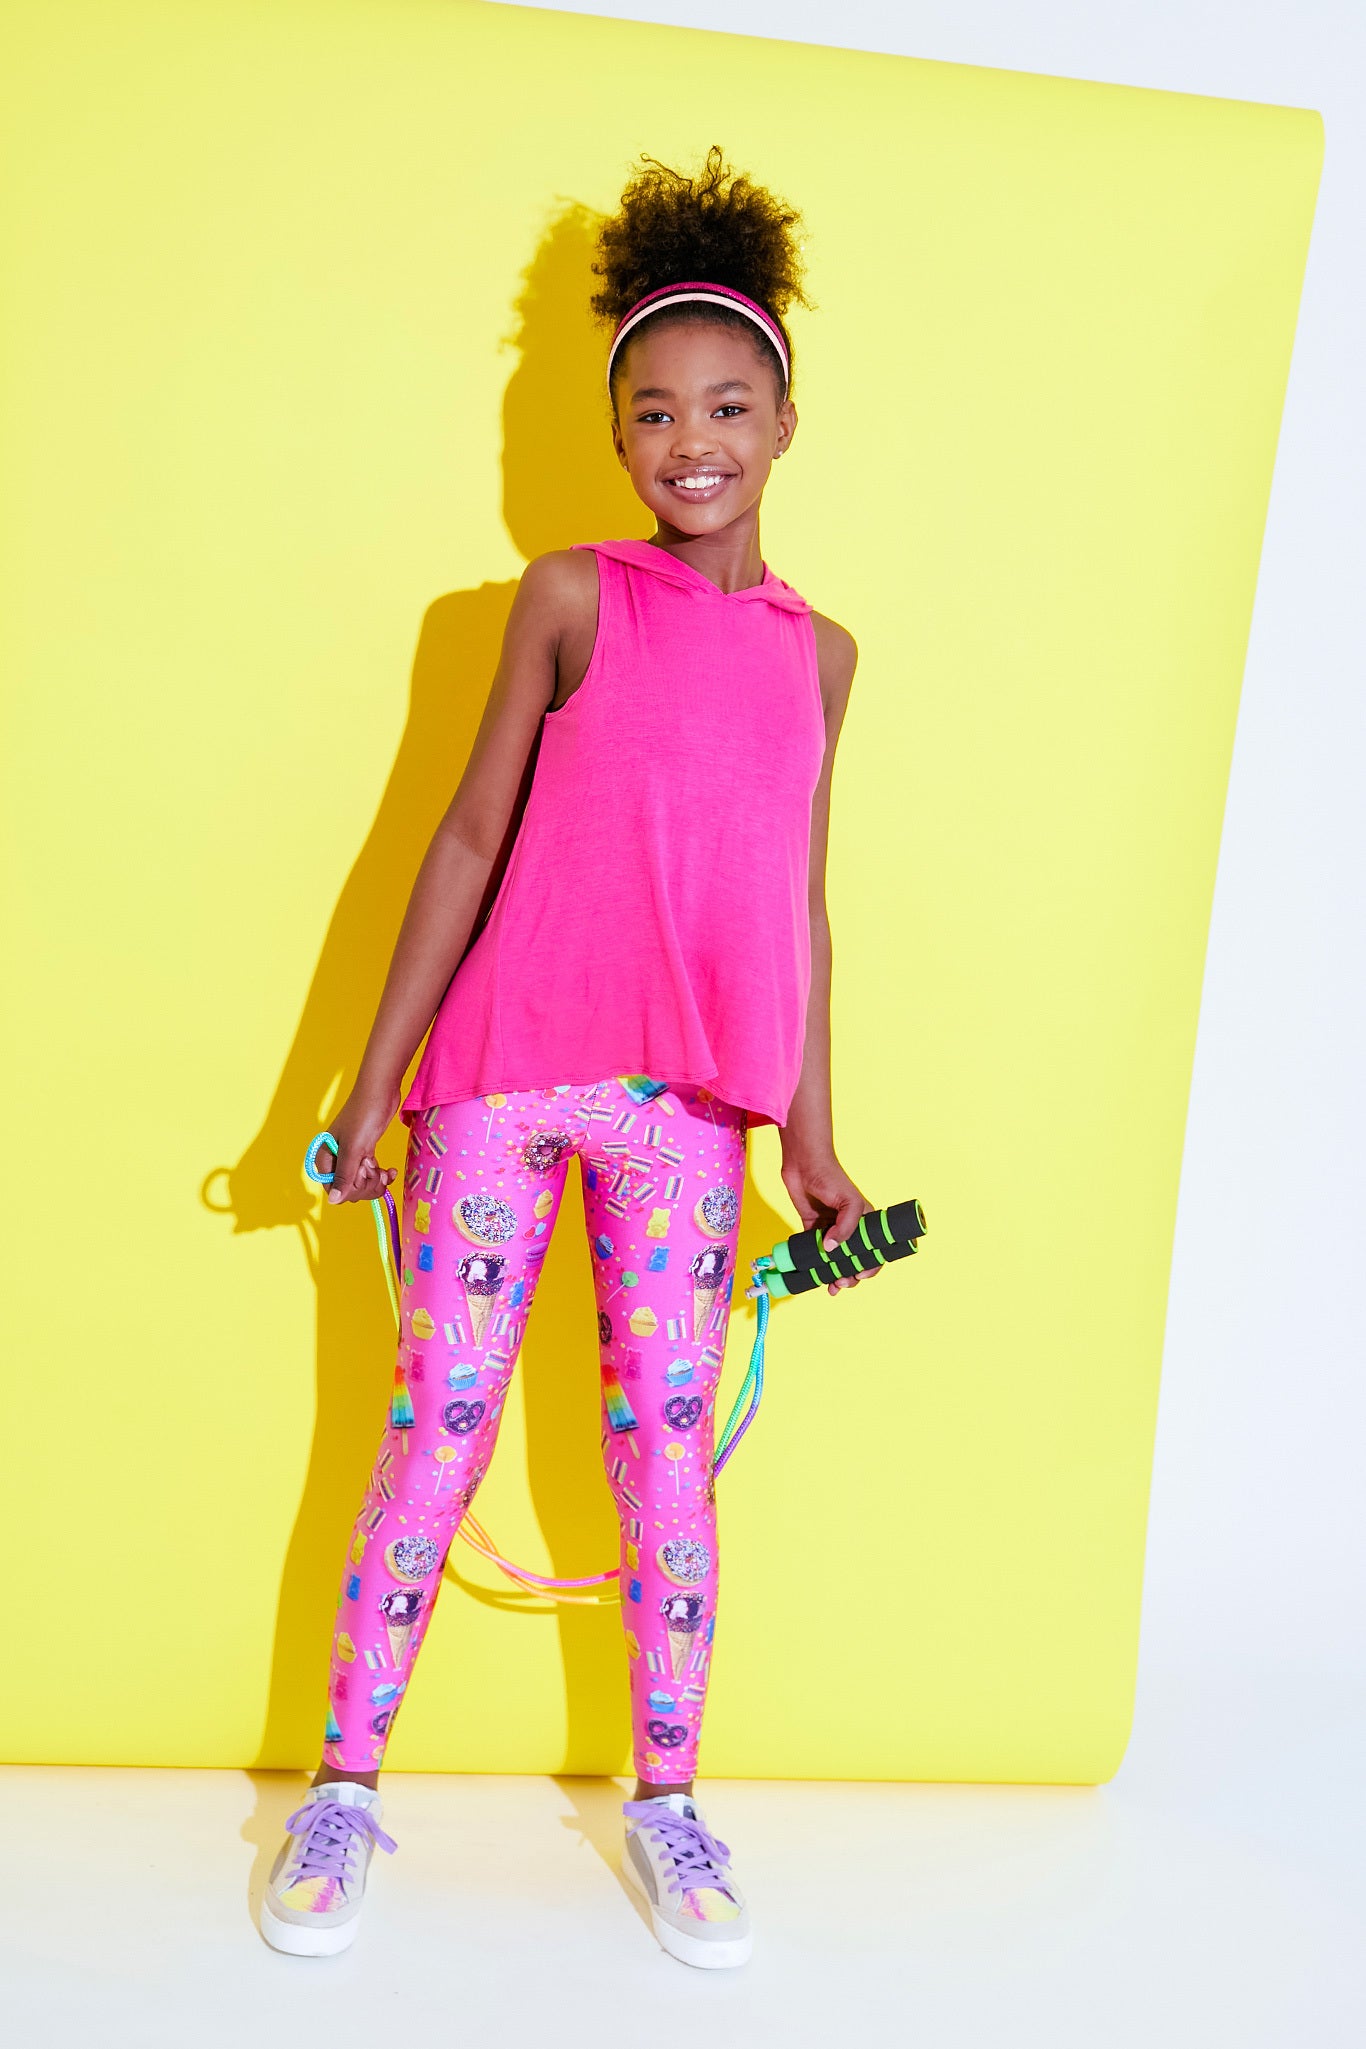 Krizzy Printed Leggings for Kids 7-10 Years Old